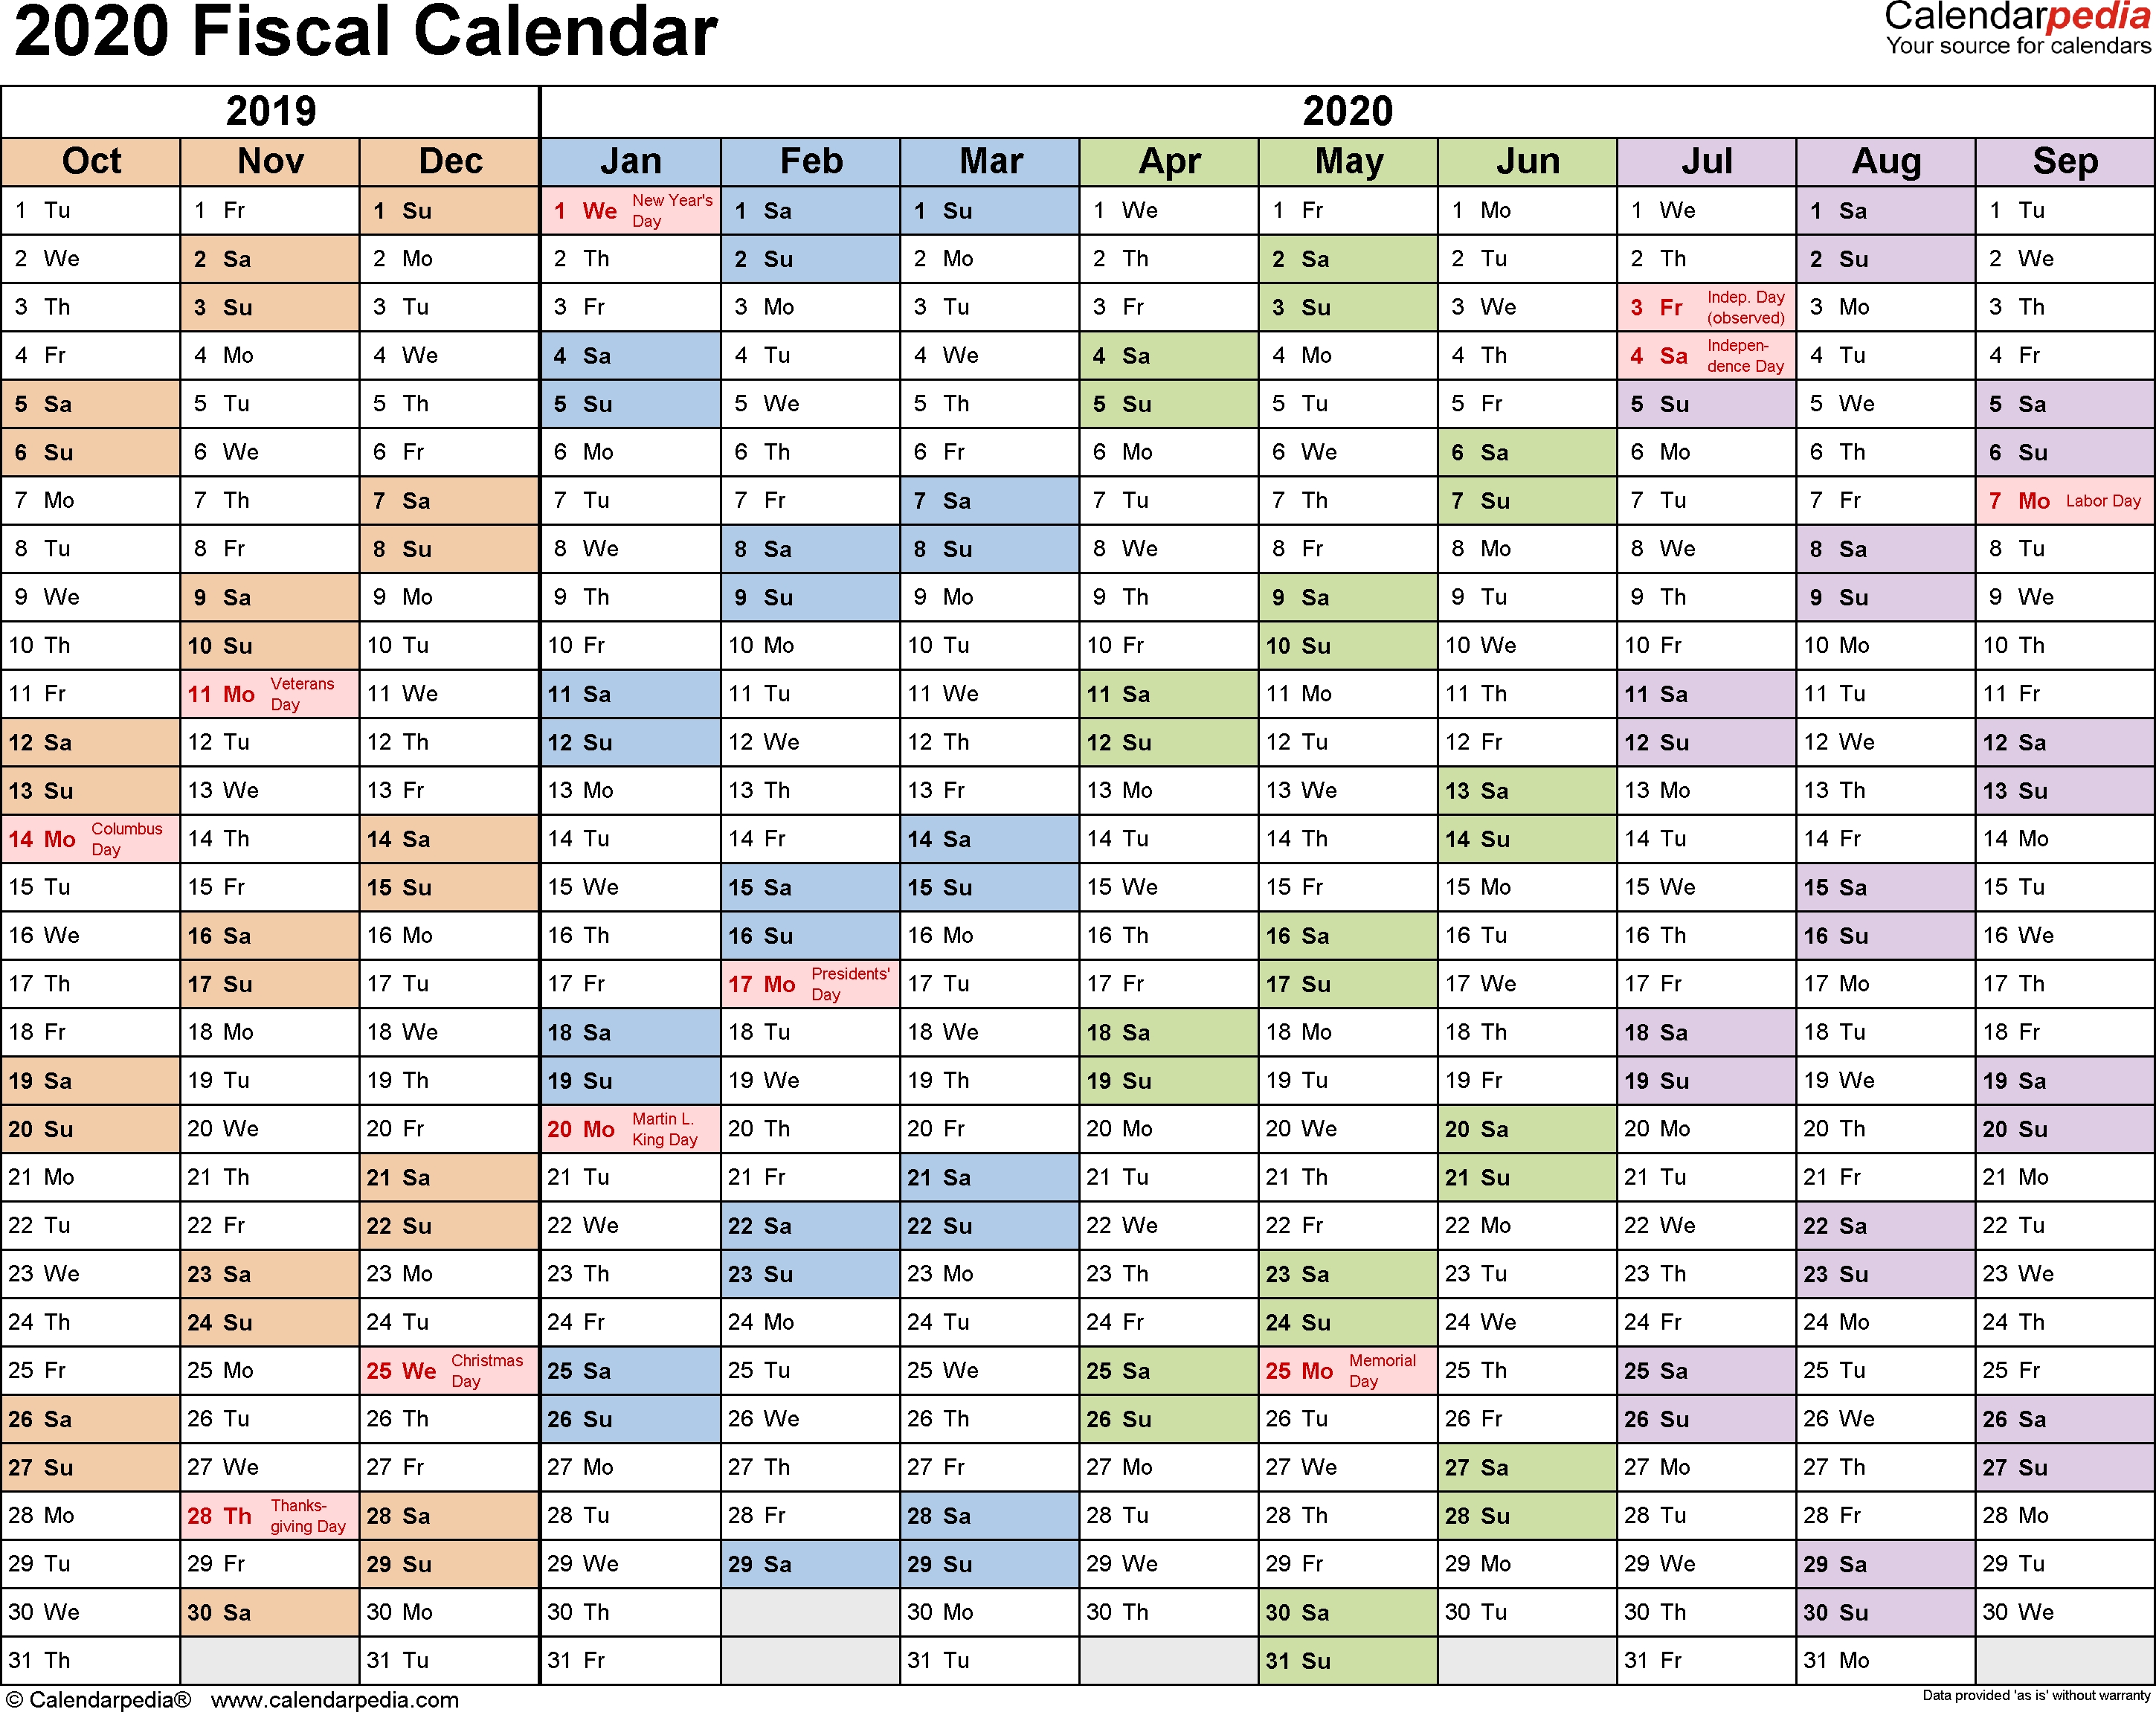 Fiscal Calendars 2020 As Free Printable Word Templates with Tax Calendar For 2019/2020